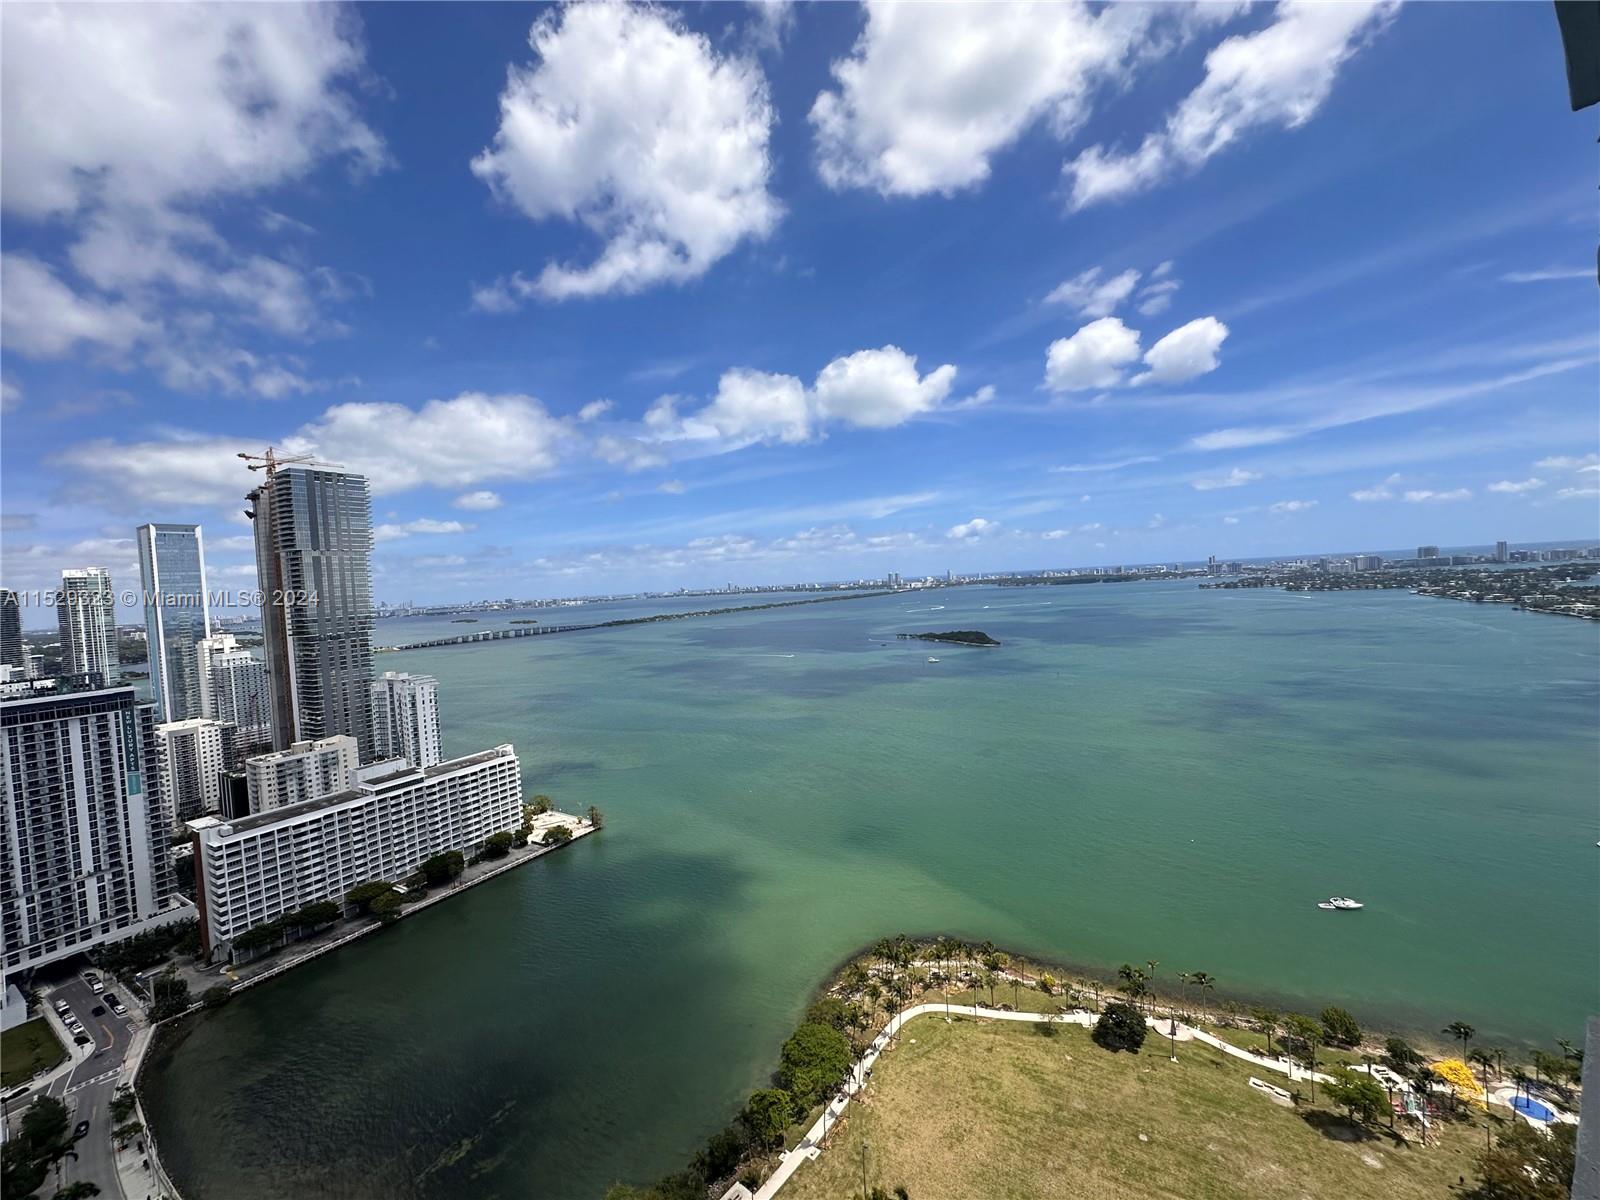 3 BED/ 3 BATH WITH INCREDIBLE VIEWS OF BISCAYNE BAY AND THE MIAMI SKYLINE IN THE HEART OF EDGEWATER FOR RENT. Spacious living/dining room with eat-in kitchen with natural light throughout and water views from every angle. Bedrooms are spacious with access to private balconies.